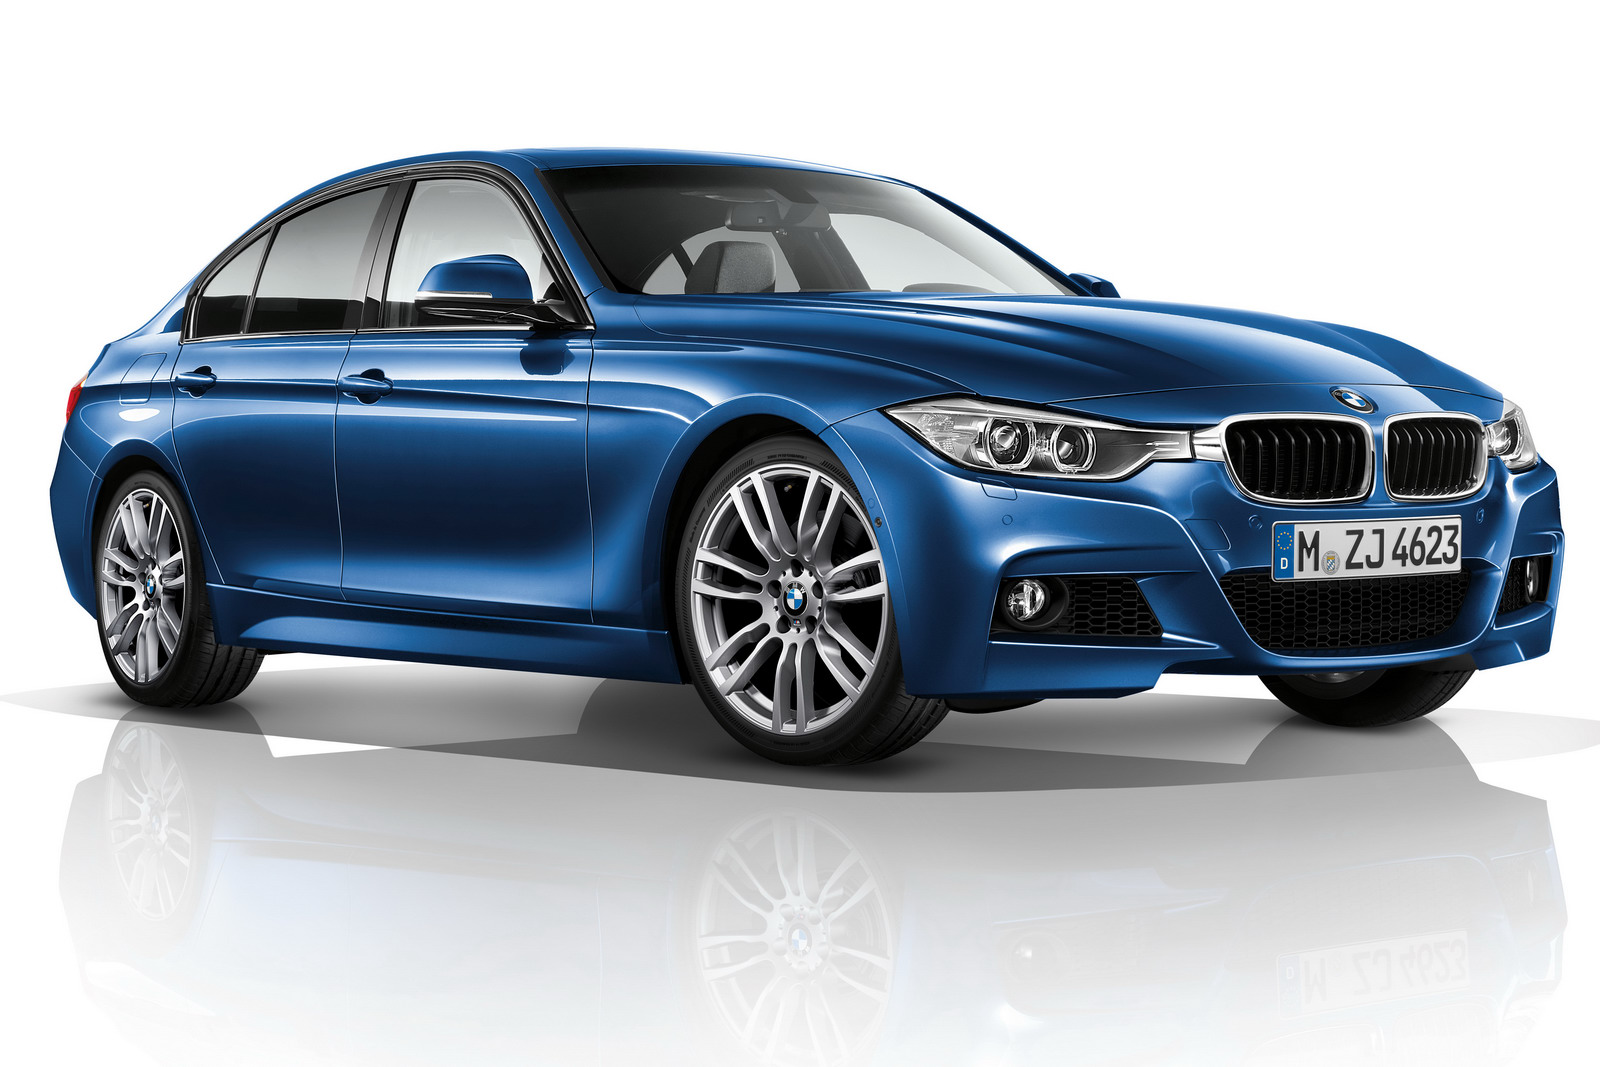 2012 BMW 3 Series gets the M Sport Package